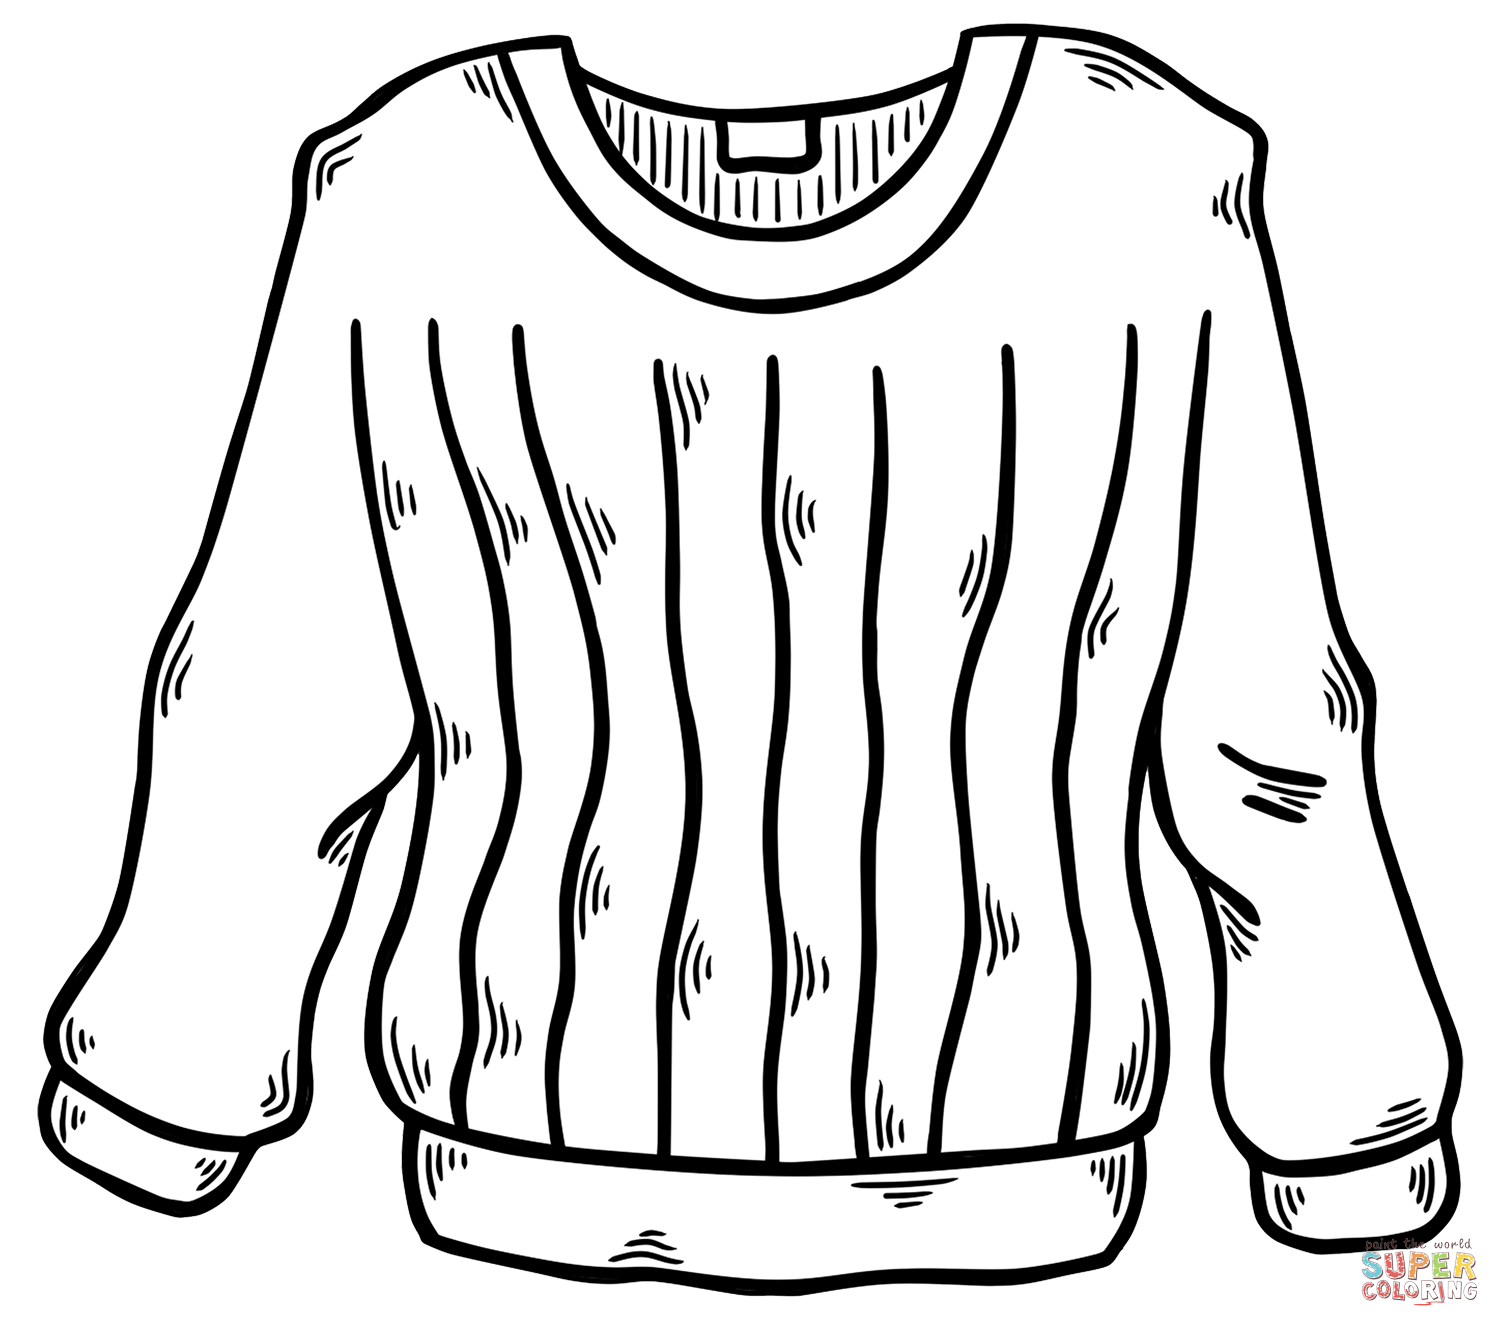 Sweater coloring page free printable coloring pages